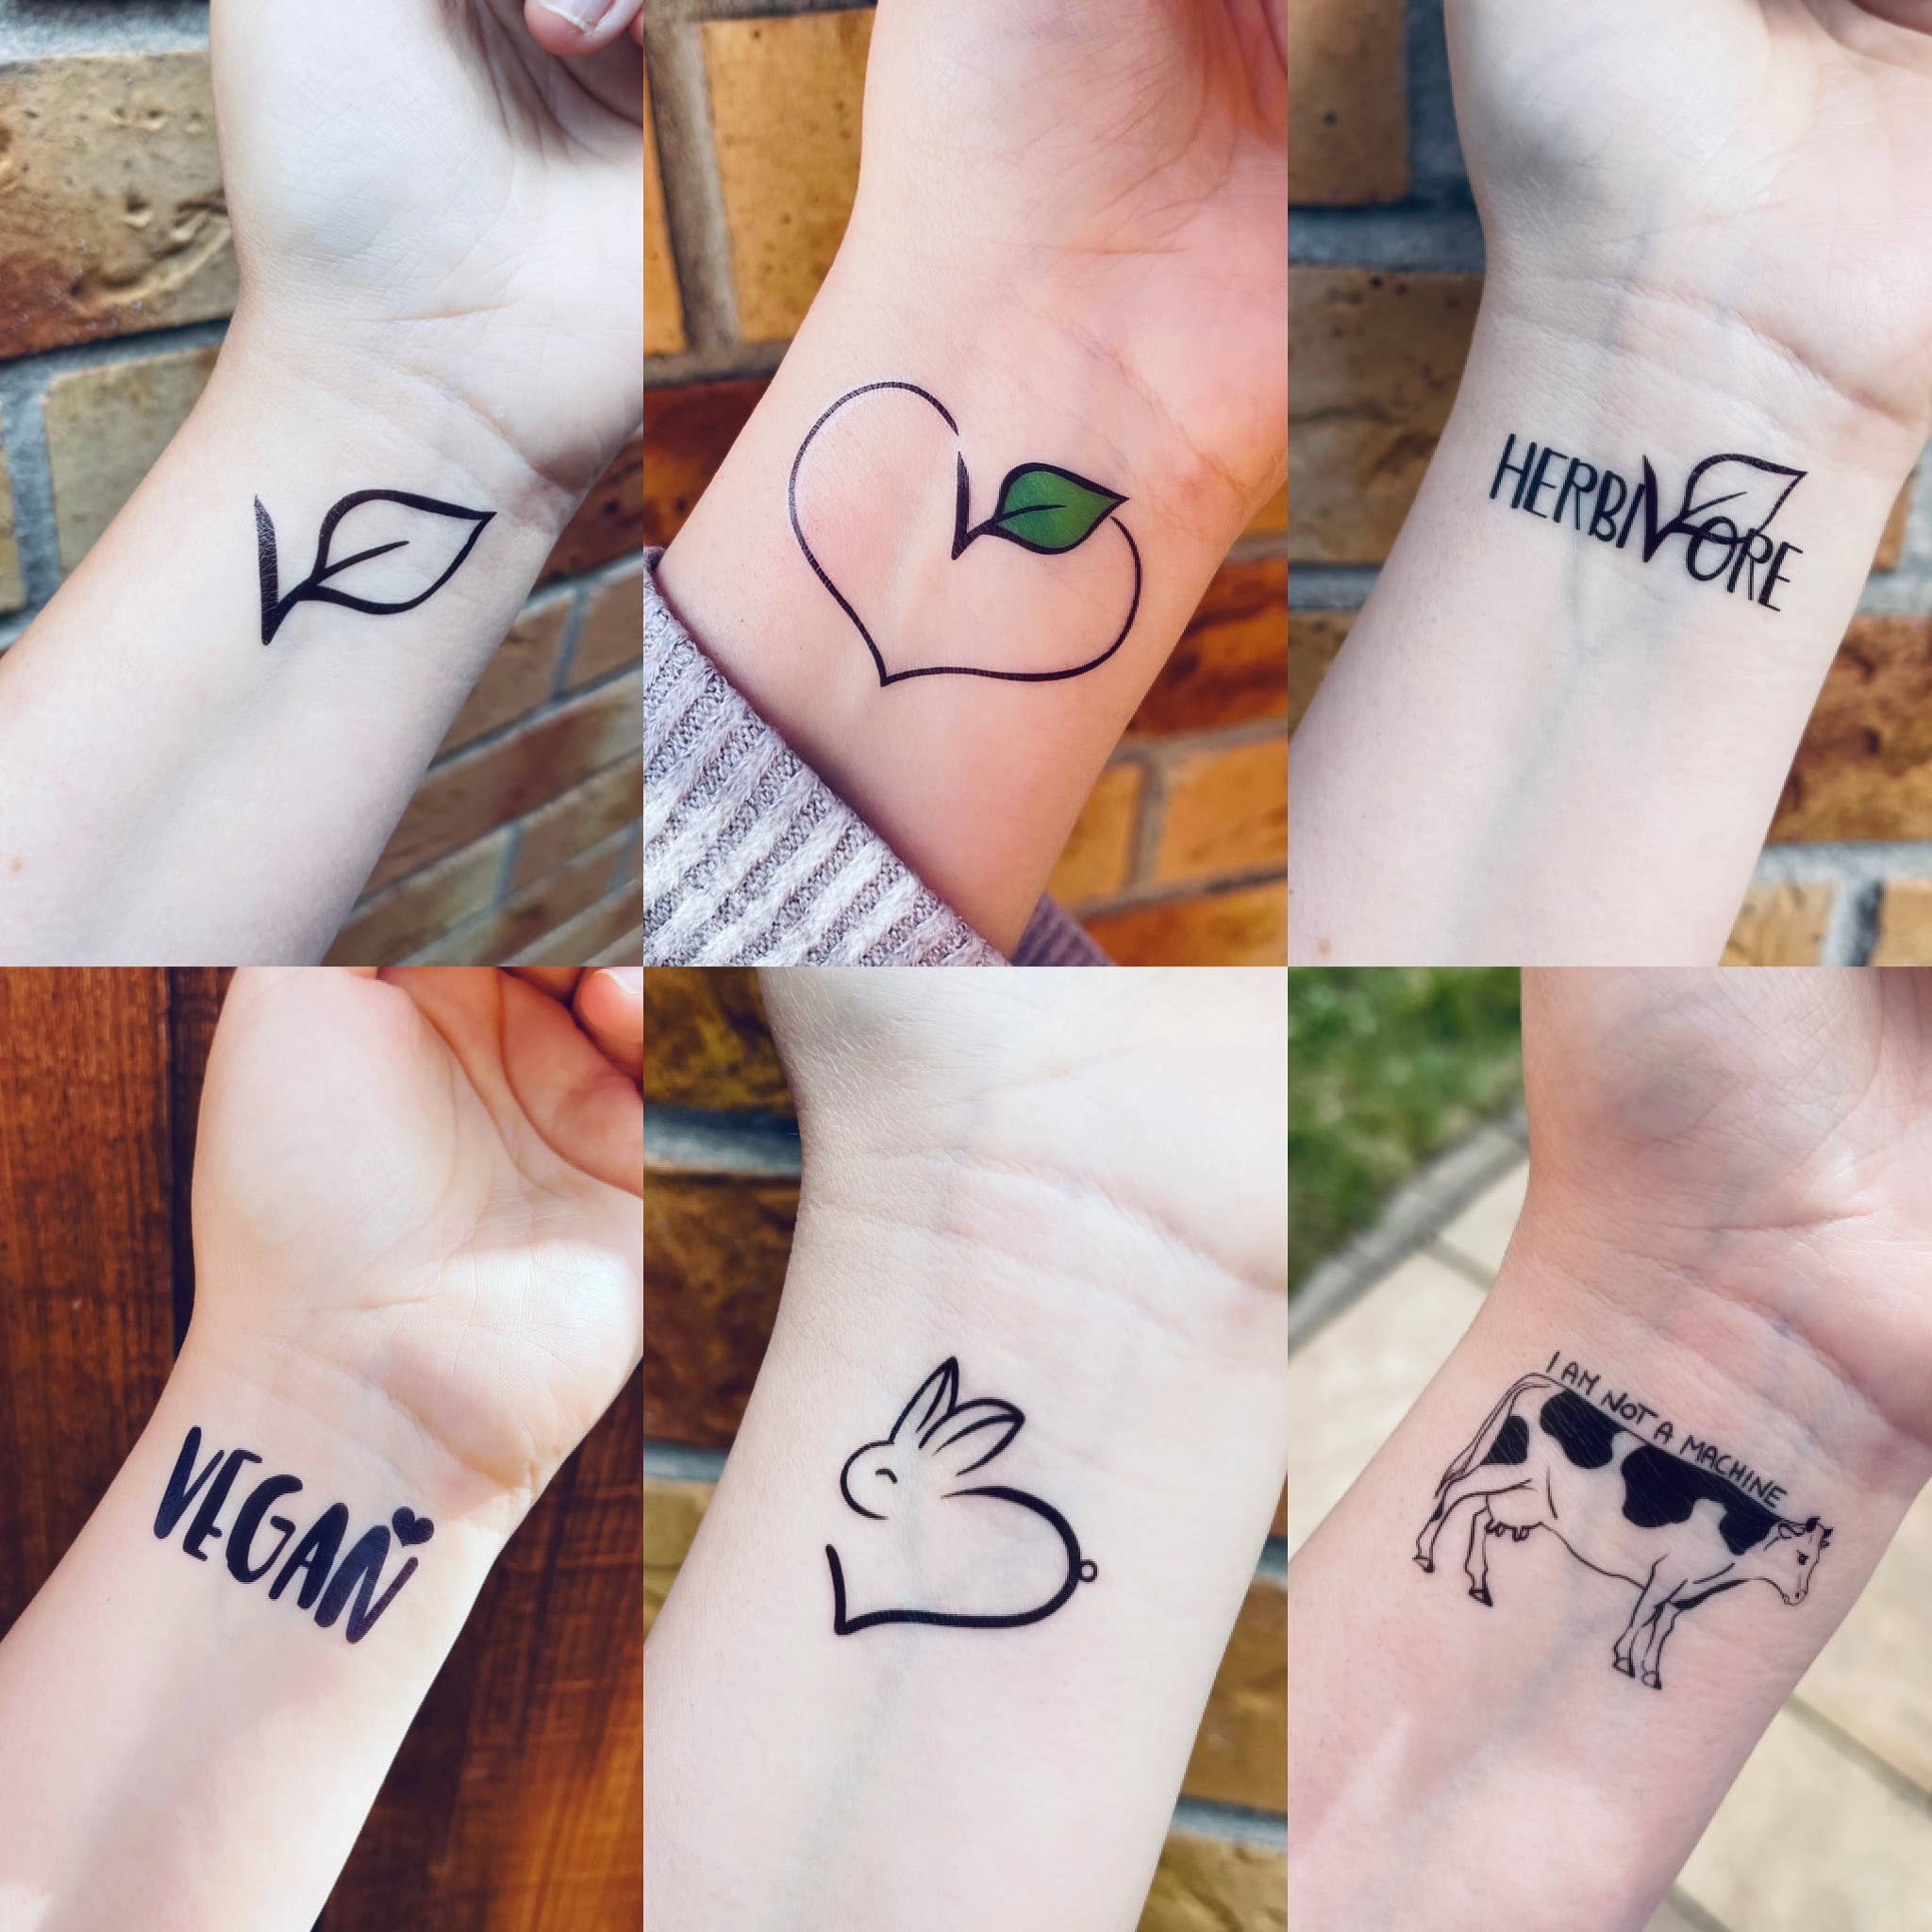 Vegan Tattoos  Dont Get Inked Before Knowing These 5 Important Things